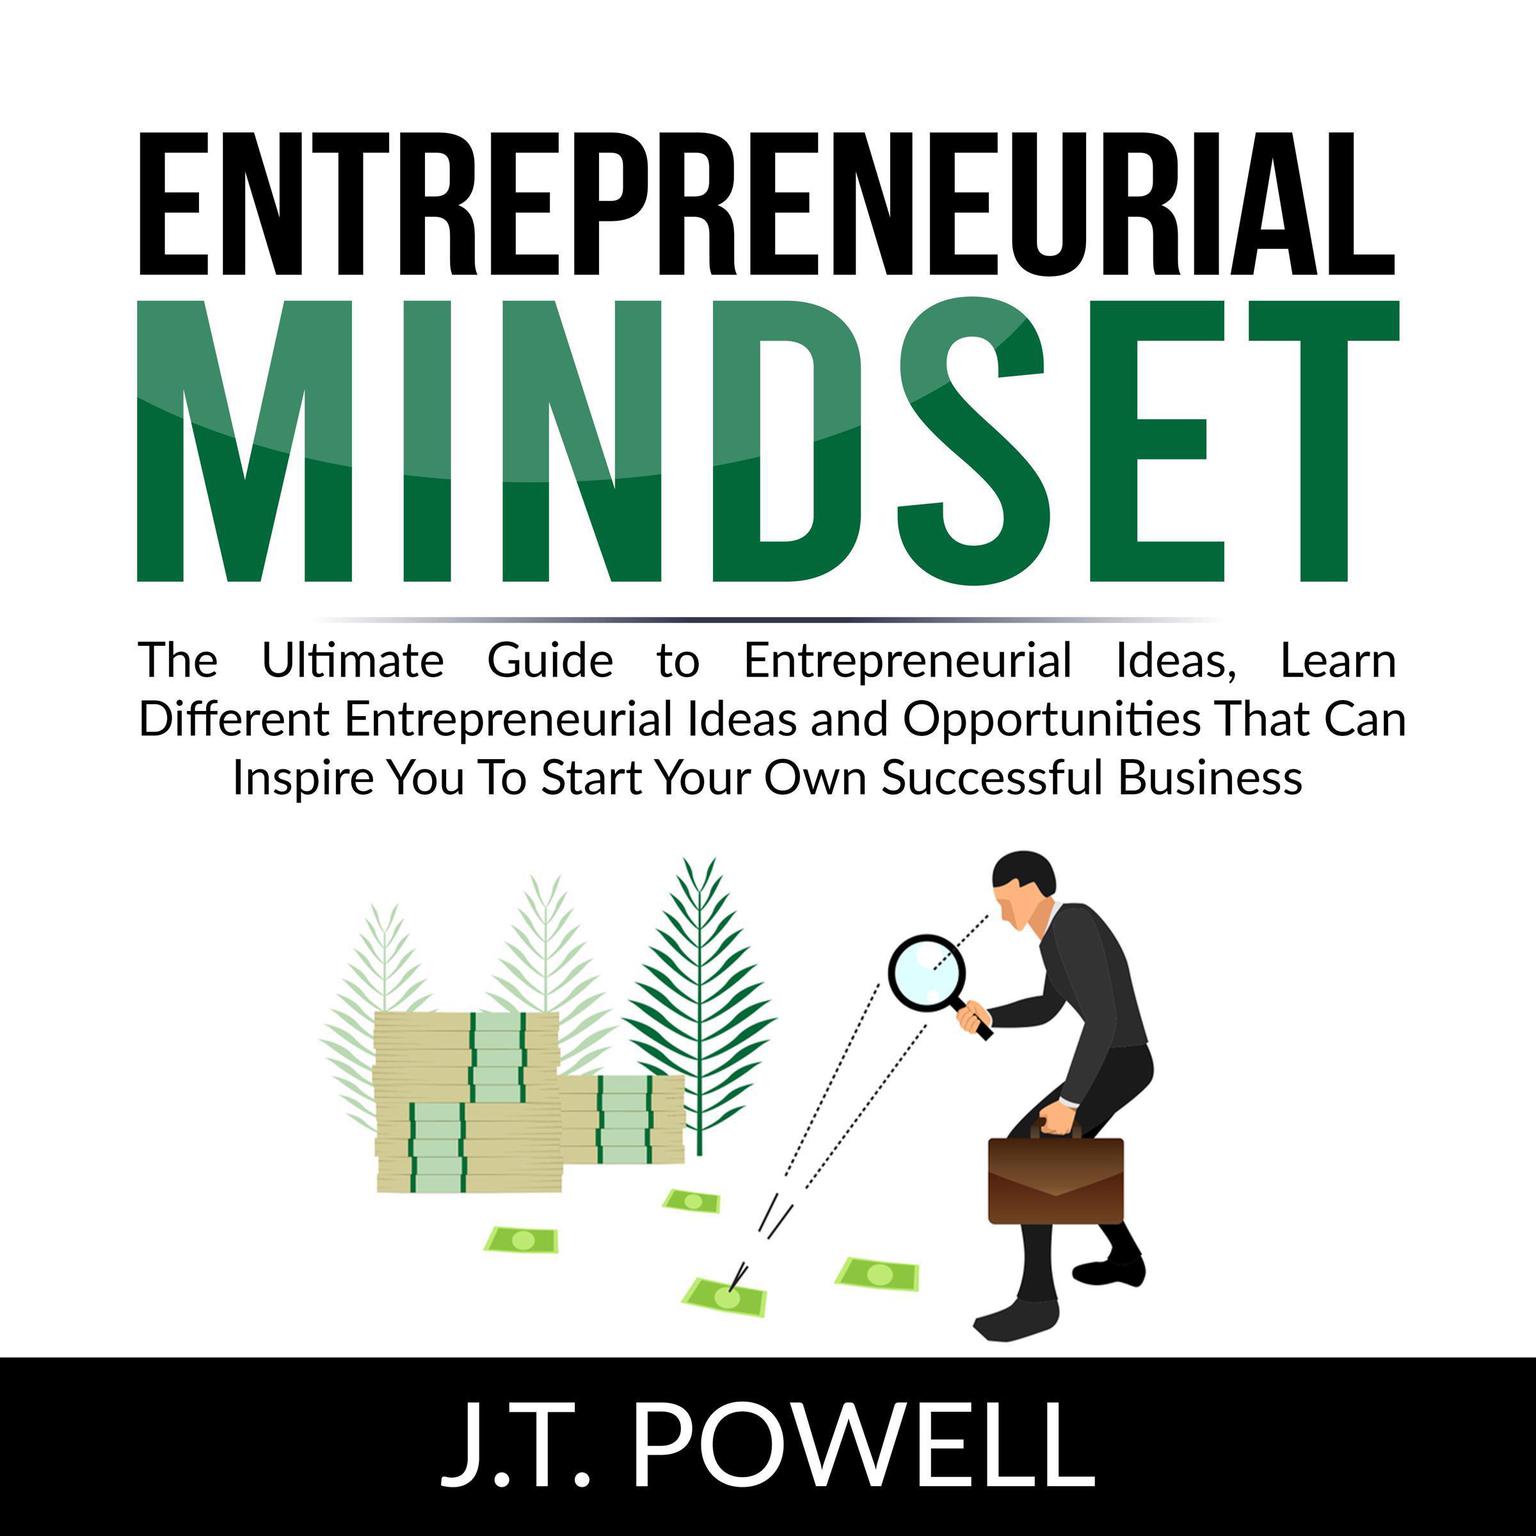 Entrepreneurial Mindset: The Ultimate Guide to Entrepreneurial Ideas, Learn Different Entrepreneurial Ideas and Opportunities That Can Inspire You To Start Your Own Successful Business Audiobook, by J.T. Powell